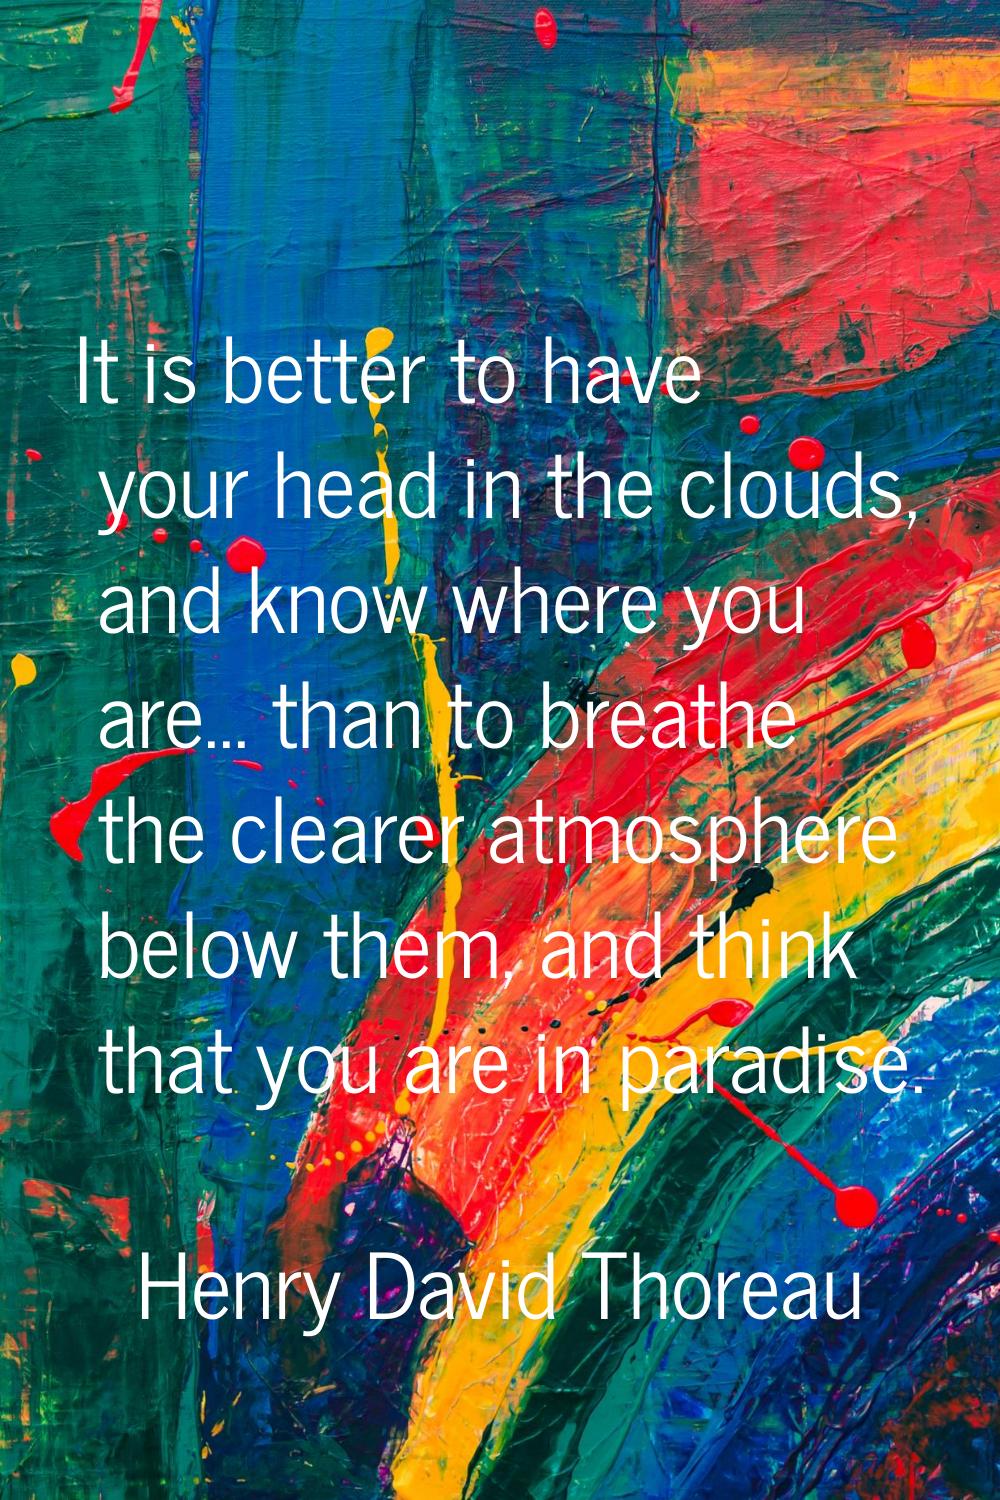 It is better to have your head in the clouds, and know where you are... than to breathe the clearer